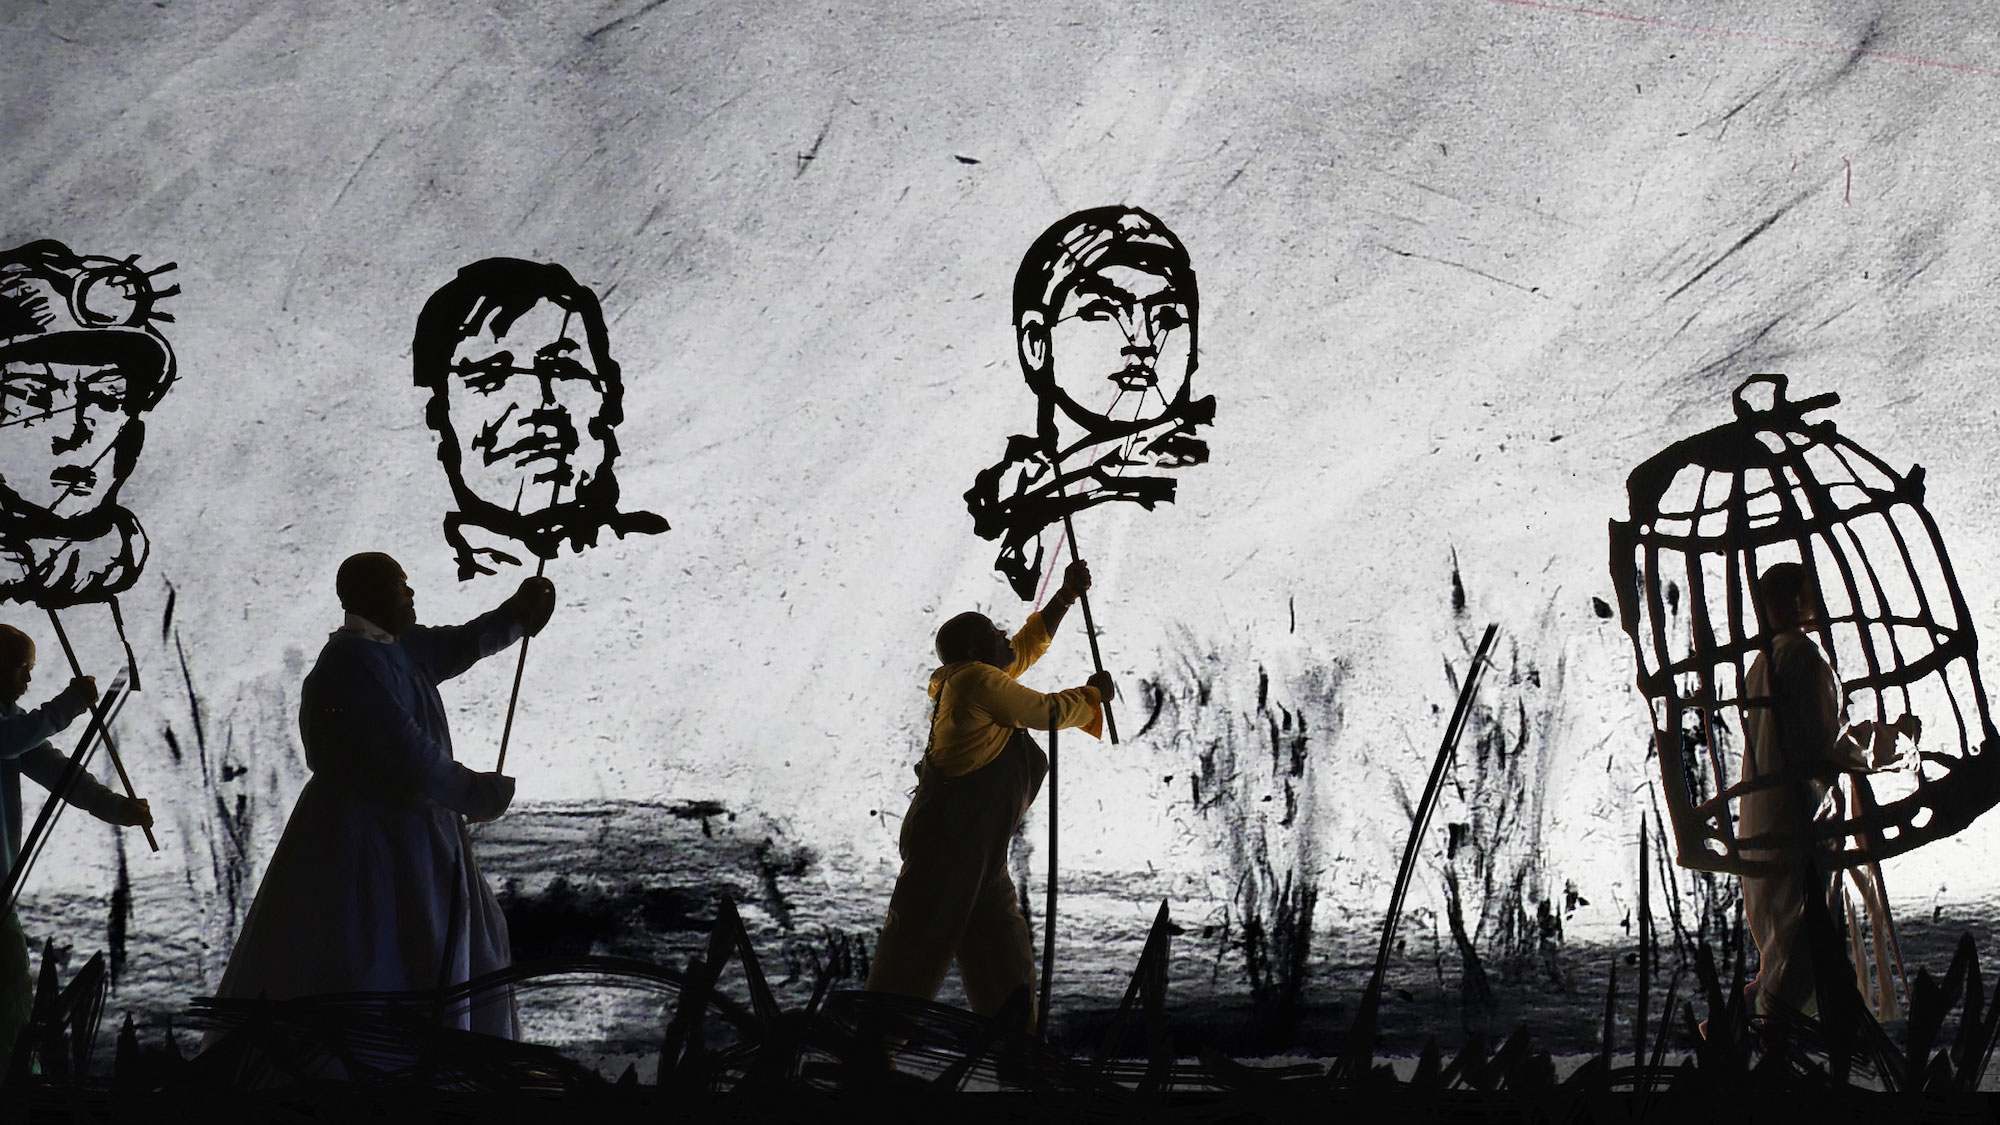 William Kentridge. More Sweetly Play The Dance. Image courtesy of the artist and Goodman Gallery, Johannesburg.